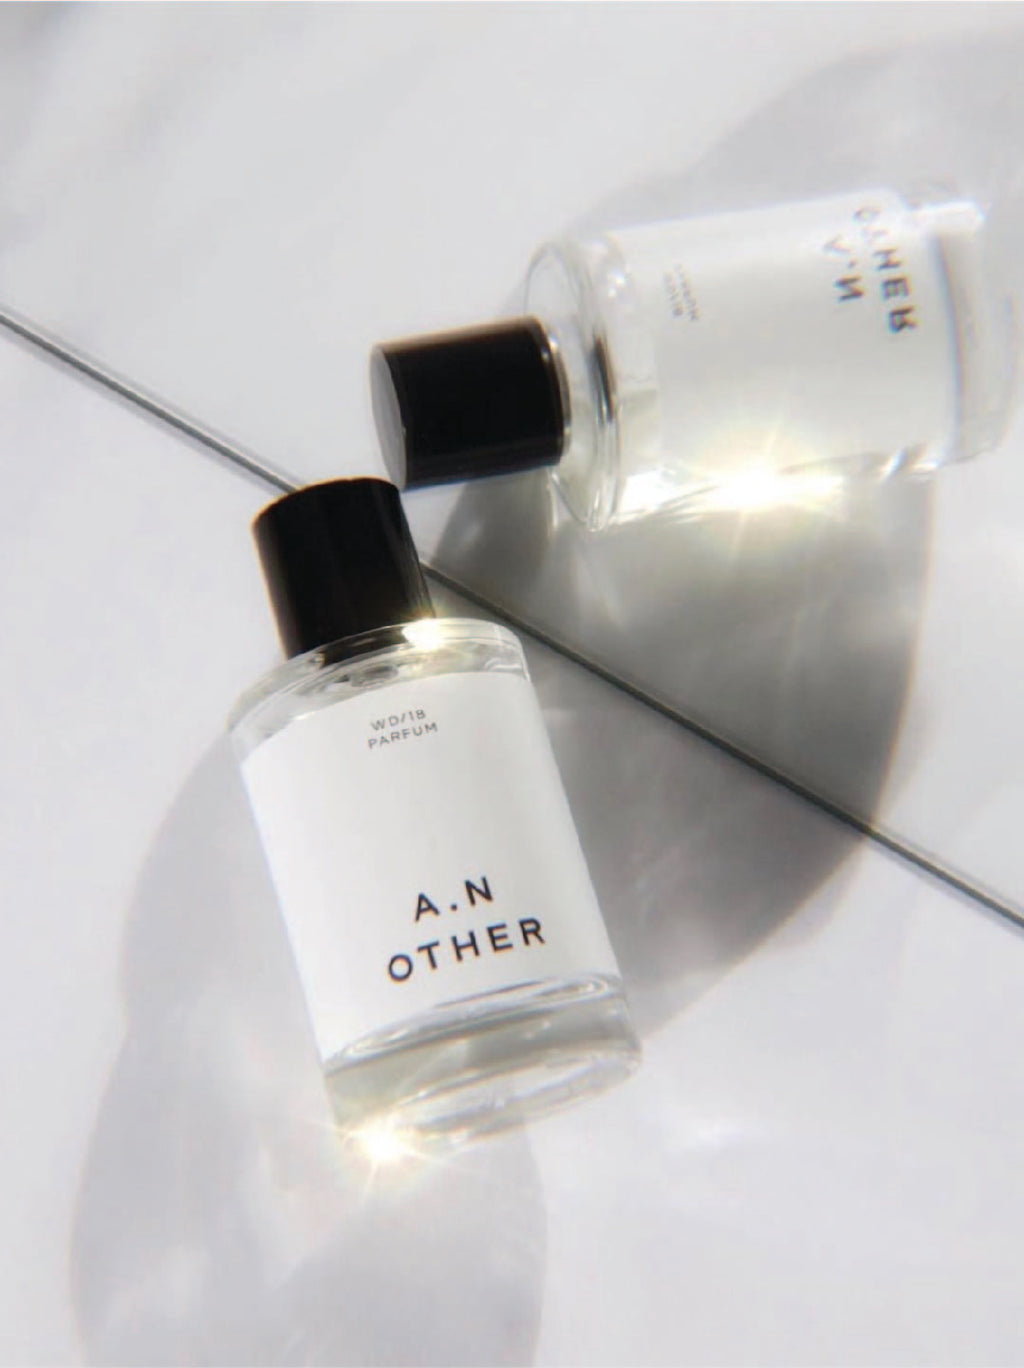 WD/2018 Parfum by A.N OTHER